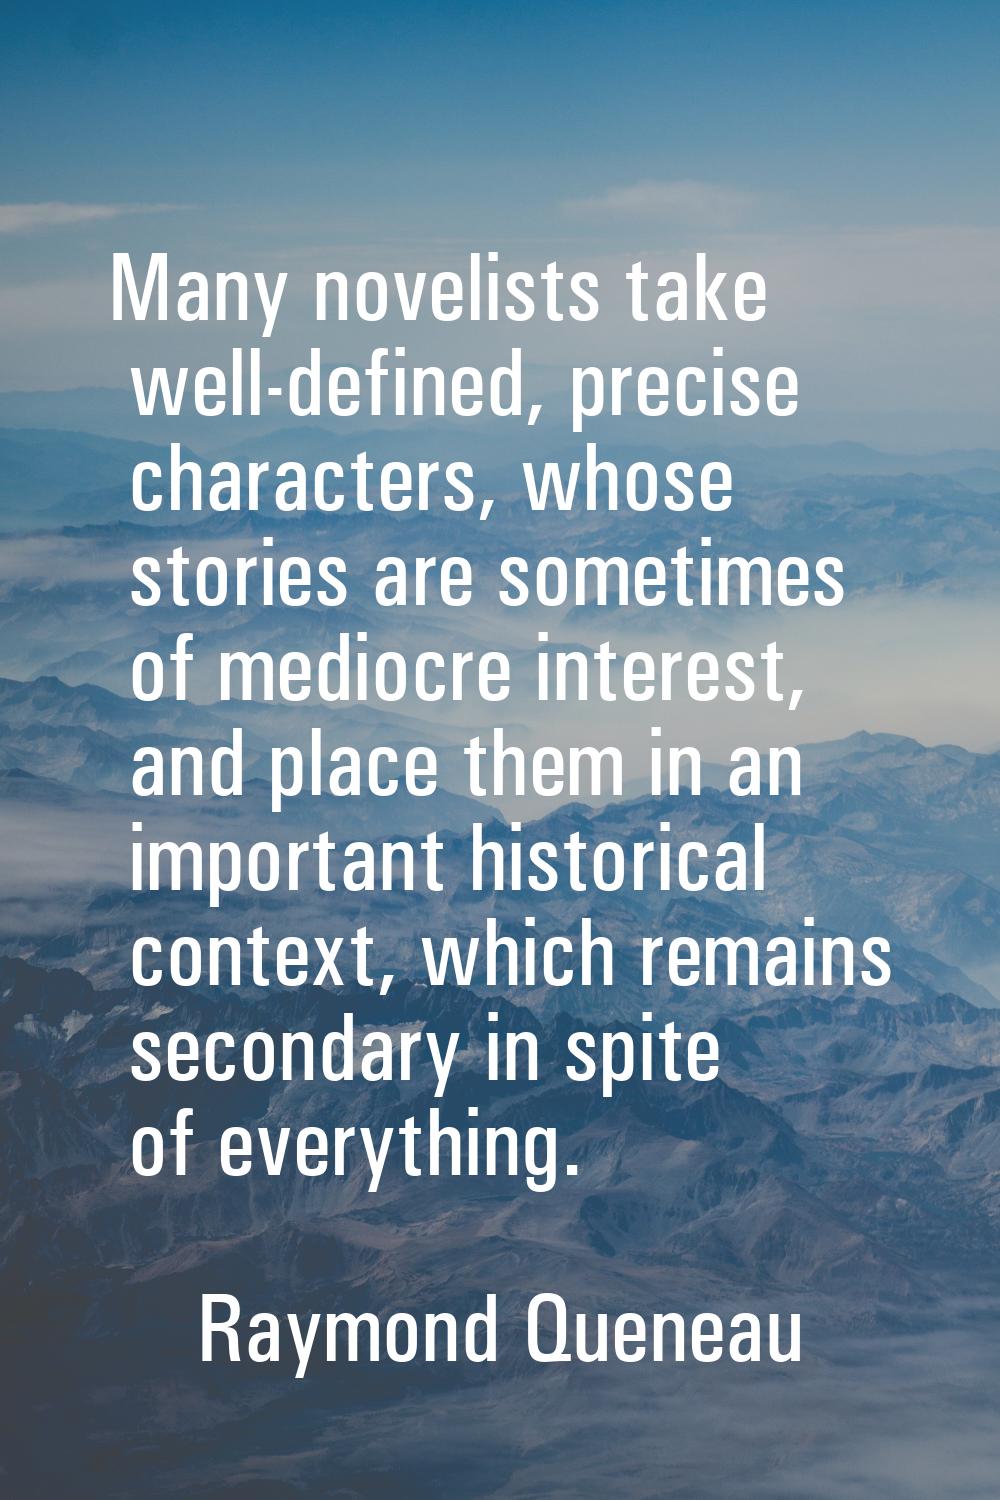 Many novelists take well-defined, precise characters, whose stories are sometimes of mediocre inter